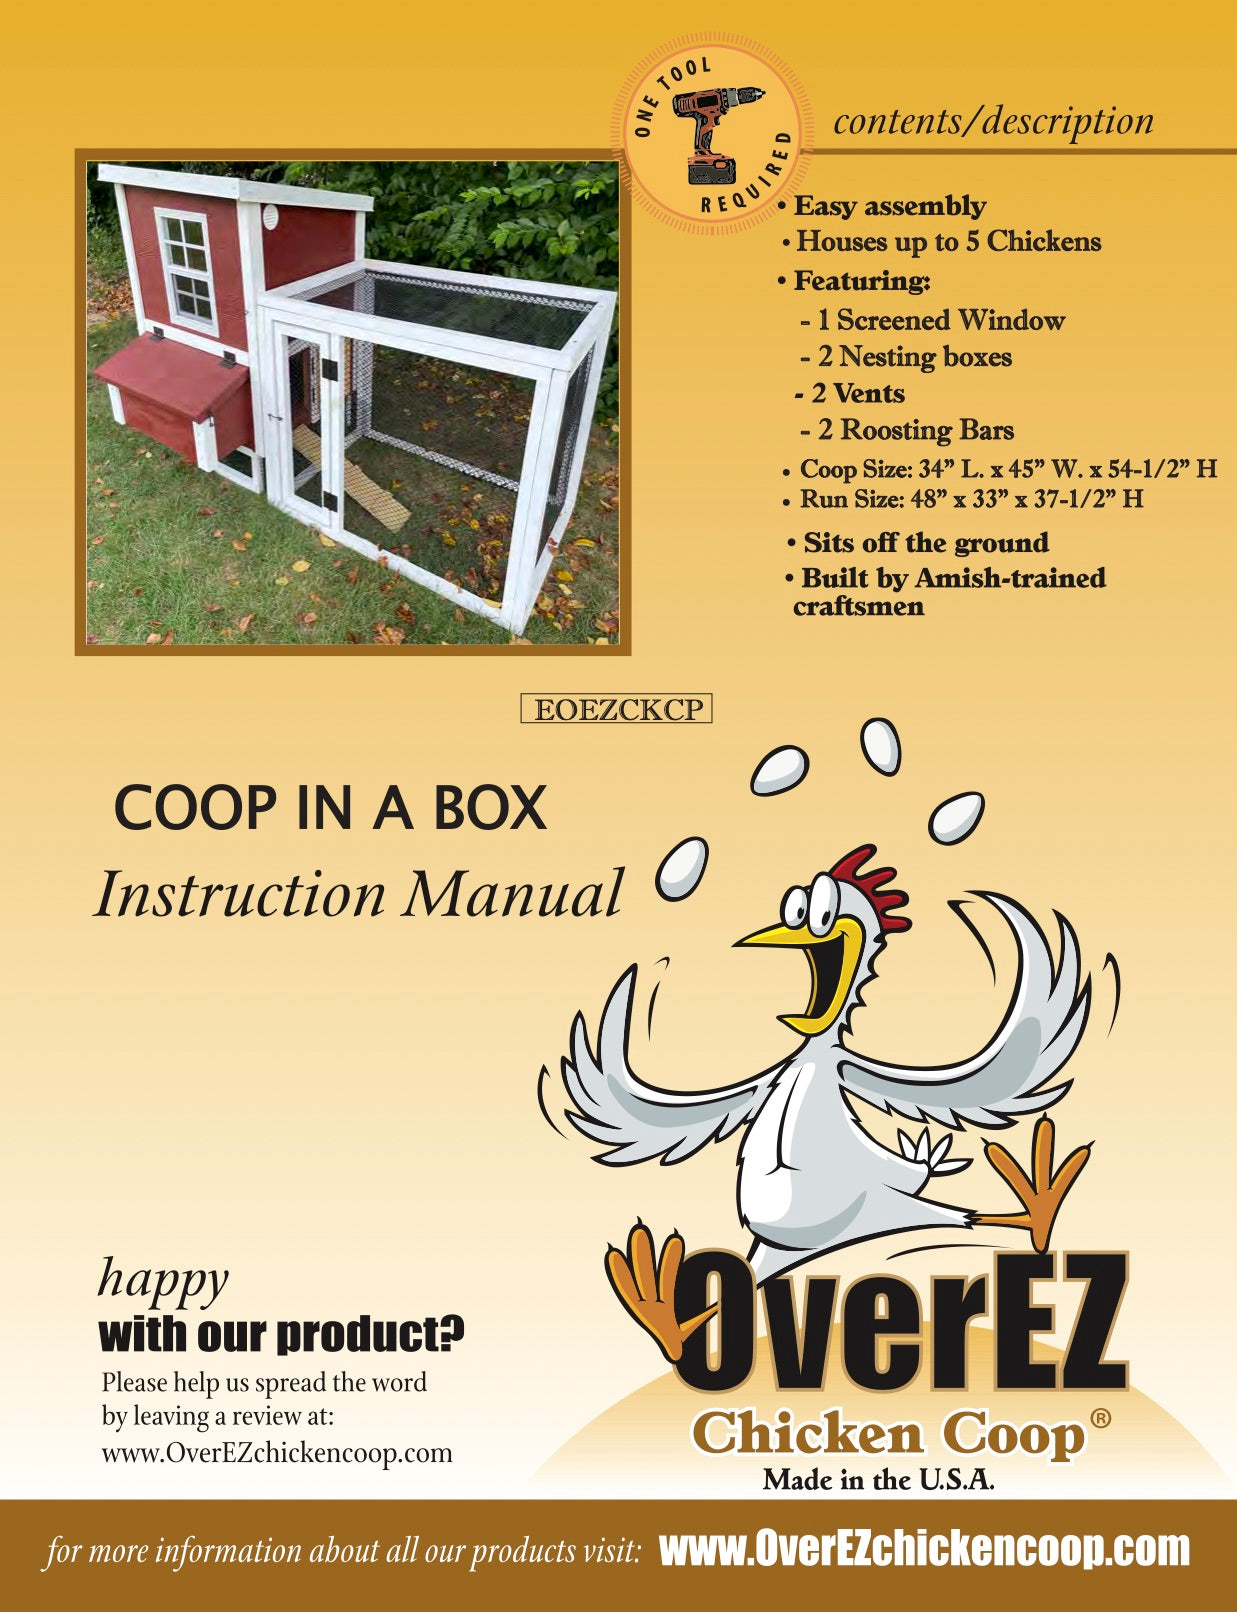 Coop in a Box instructions